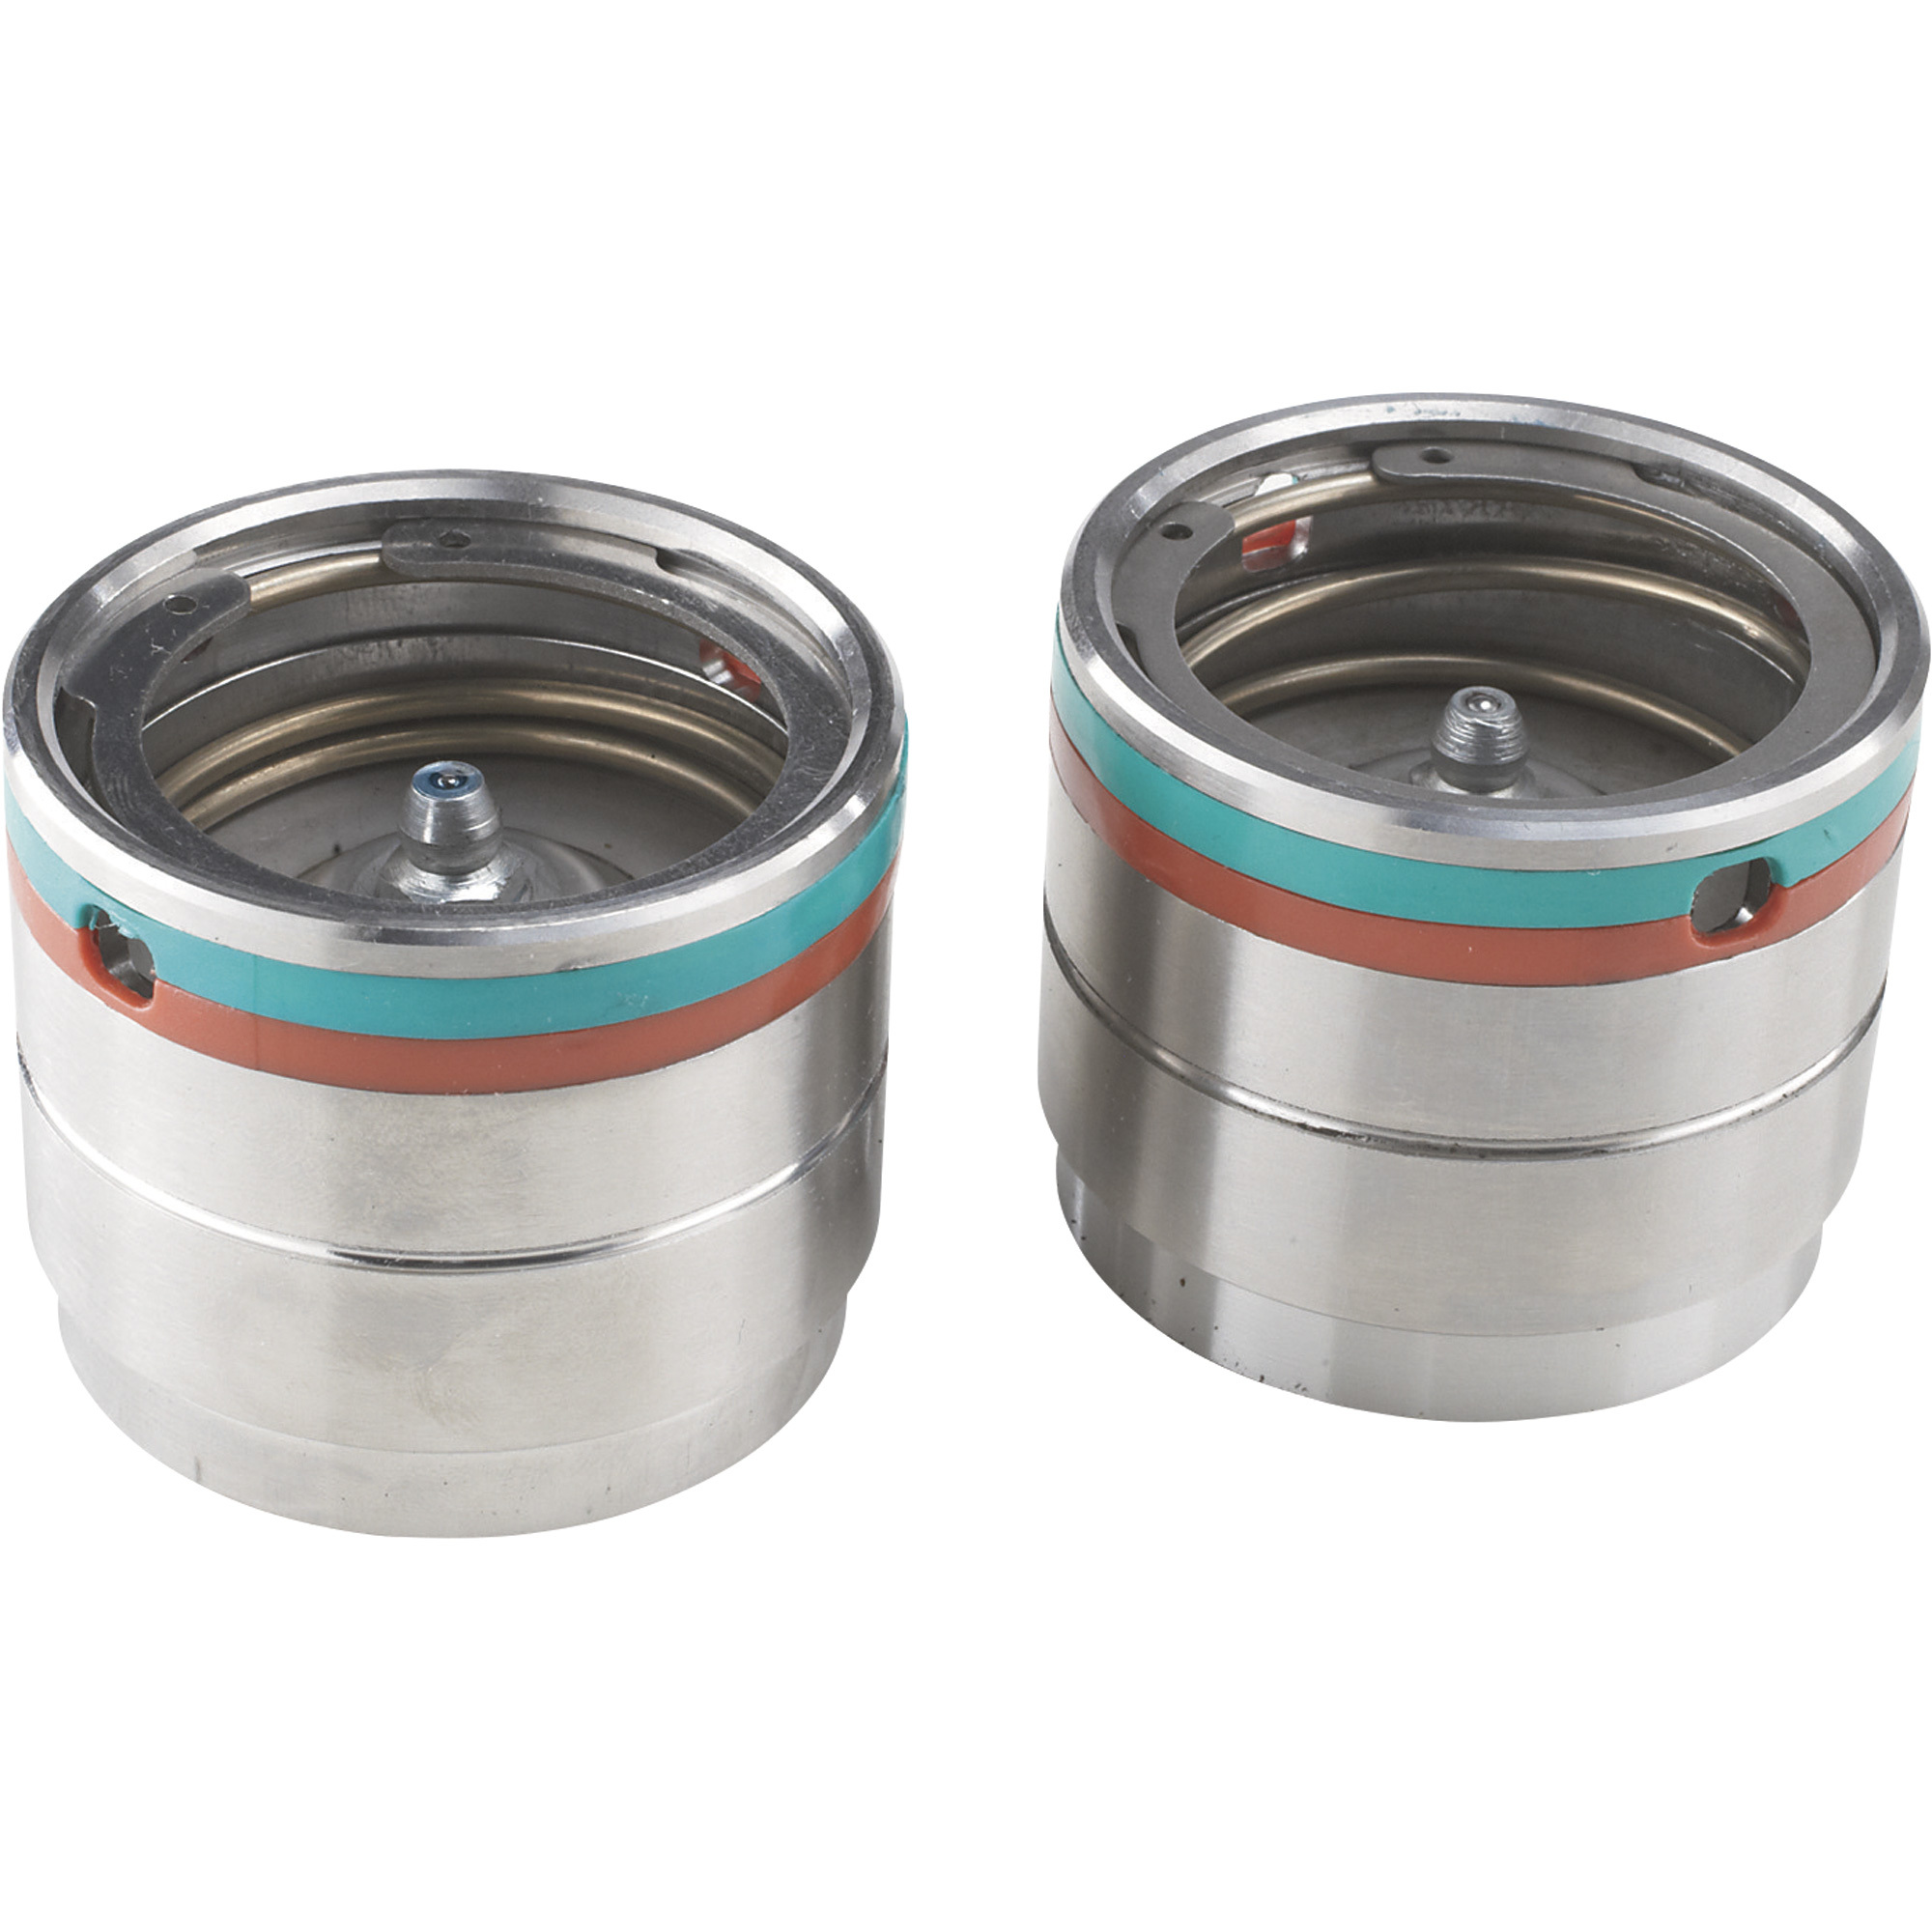 Ultra-Tow High-Performance Trailer Bearing Protectors â Pair, Fits 1.781Inch Hubs, Stainless Steel, Model 5712941